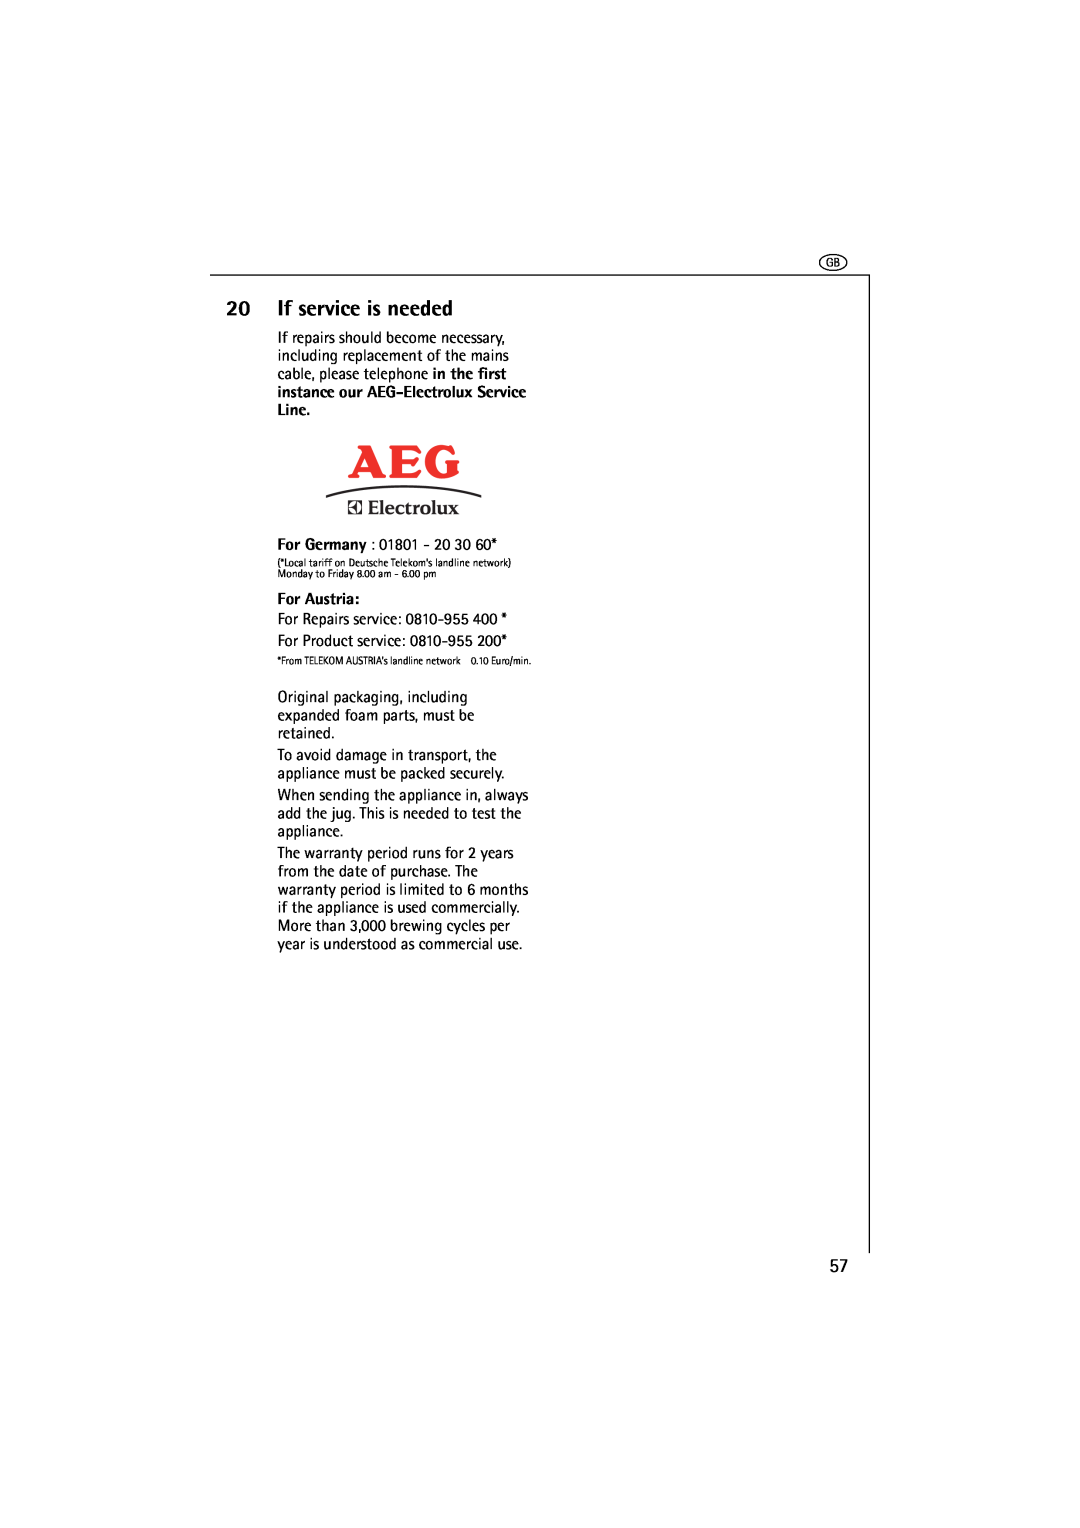 AEG CG 6400 manual If service is needed, For Austria 